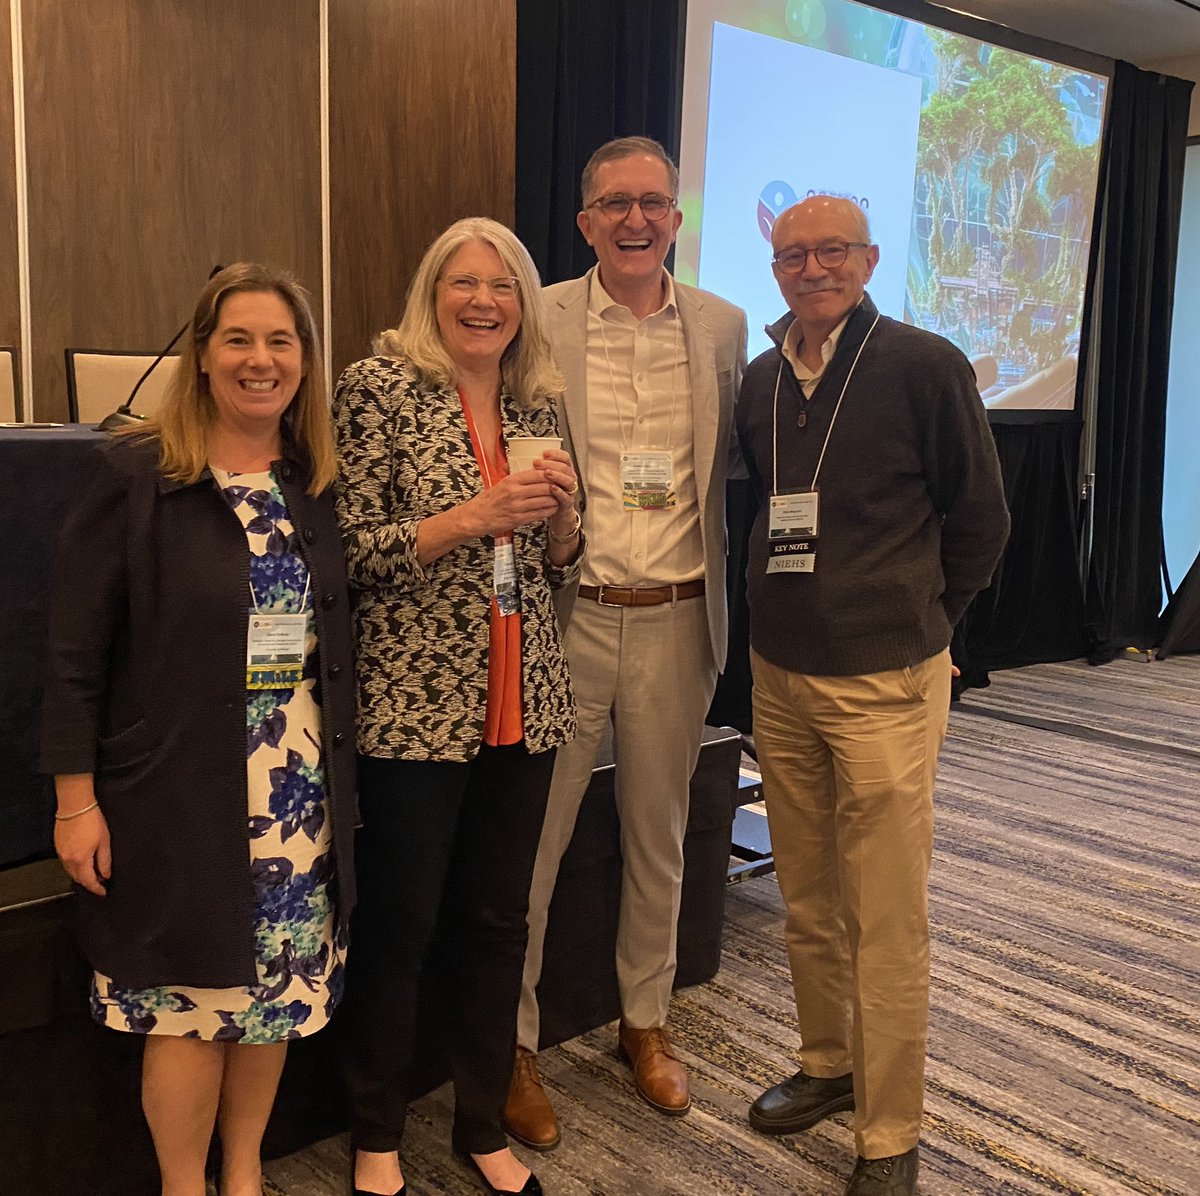 Dr. Woychik (Director @NIEHS ) and members of the #EHSCC2023 organizing committee Dr. Cheryl Walker @BaccarelliAA thank you for an amazing three days of environmental health discussion. #NIEHS_EHSCC